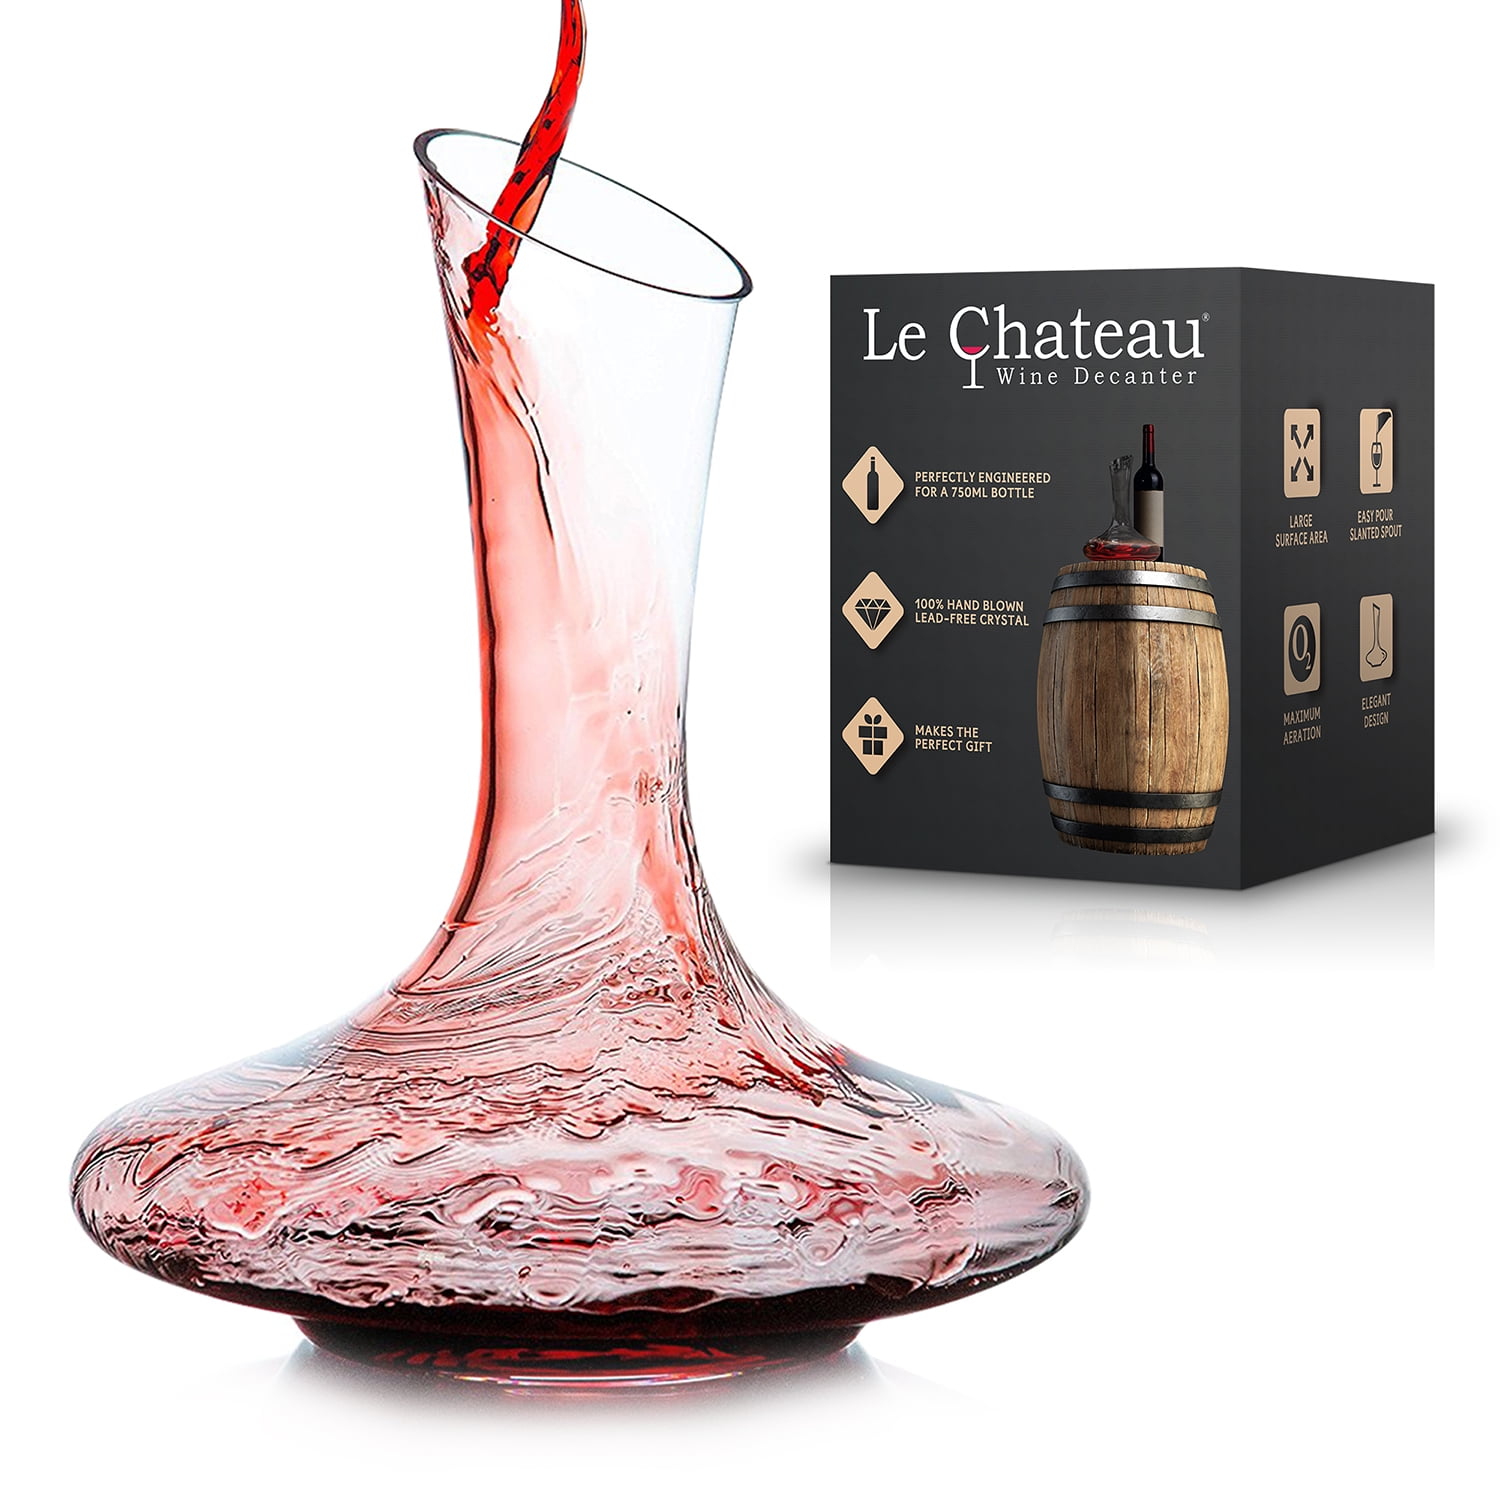 New packaging YouYah Wine Decanter With Wine Aerator Filter,Red Wine Carafe,100% Hand Blown Lead-free Crystal Glass,Wine Pourer,Wine Accessories,Wine Gift 